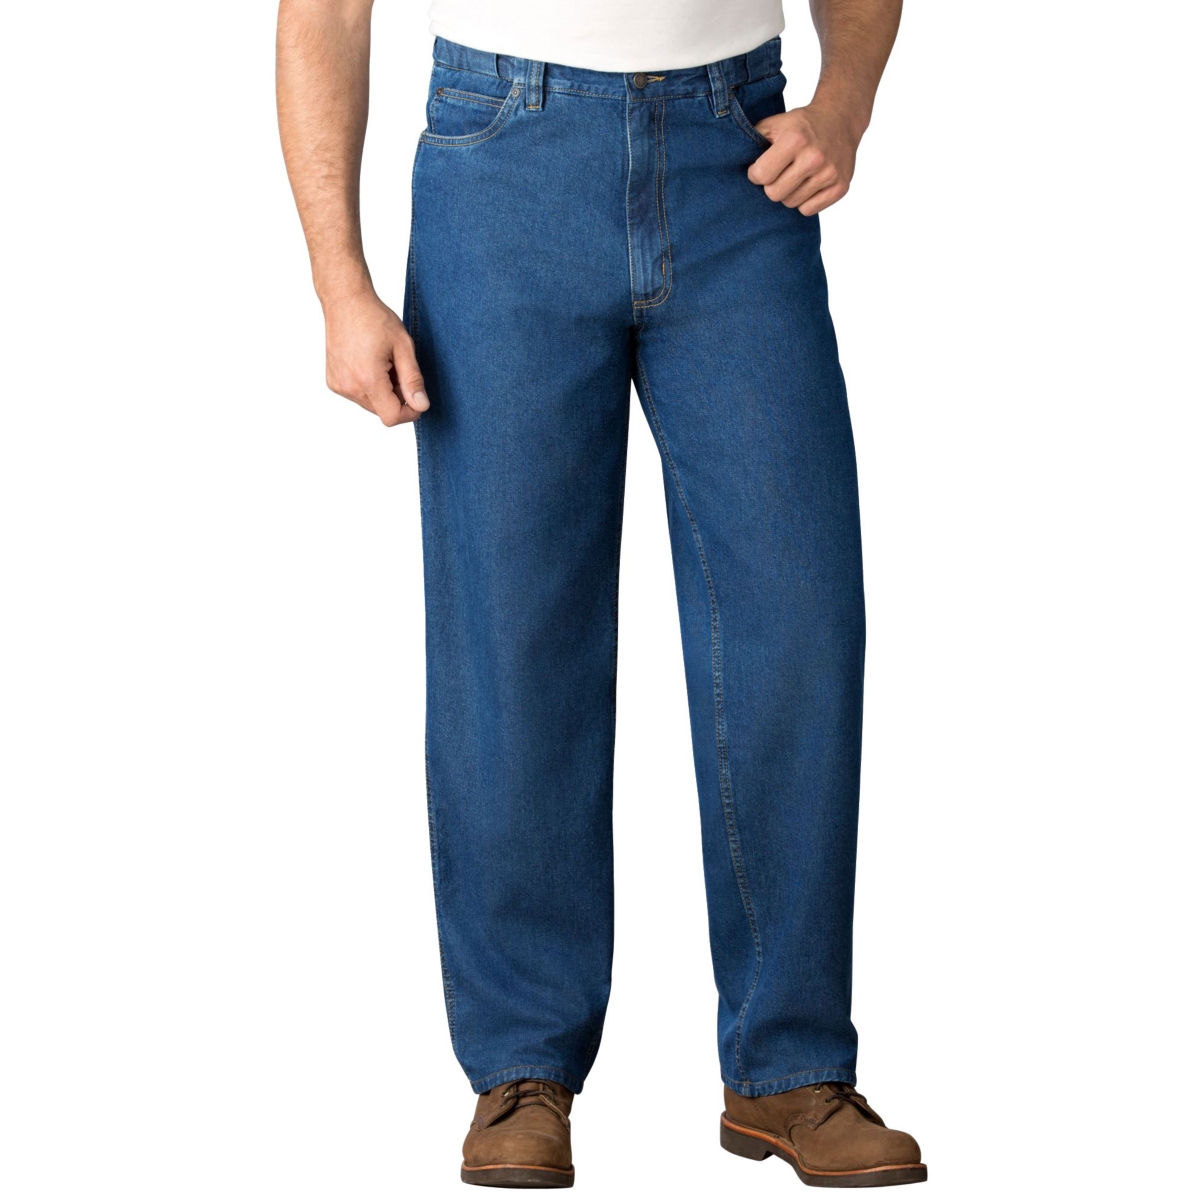 Big & Tall Expandable Waist Relaxed Fit Jeans - Stonewash